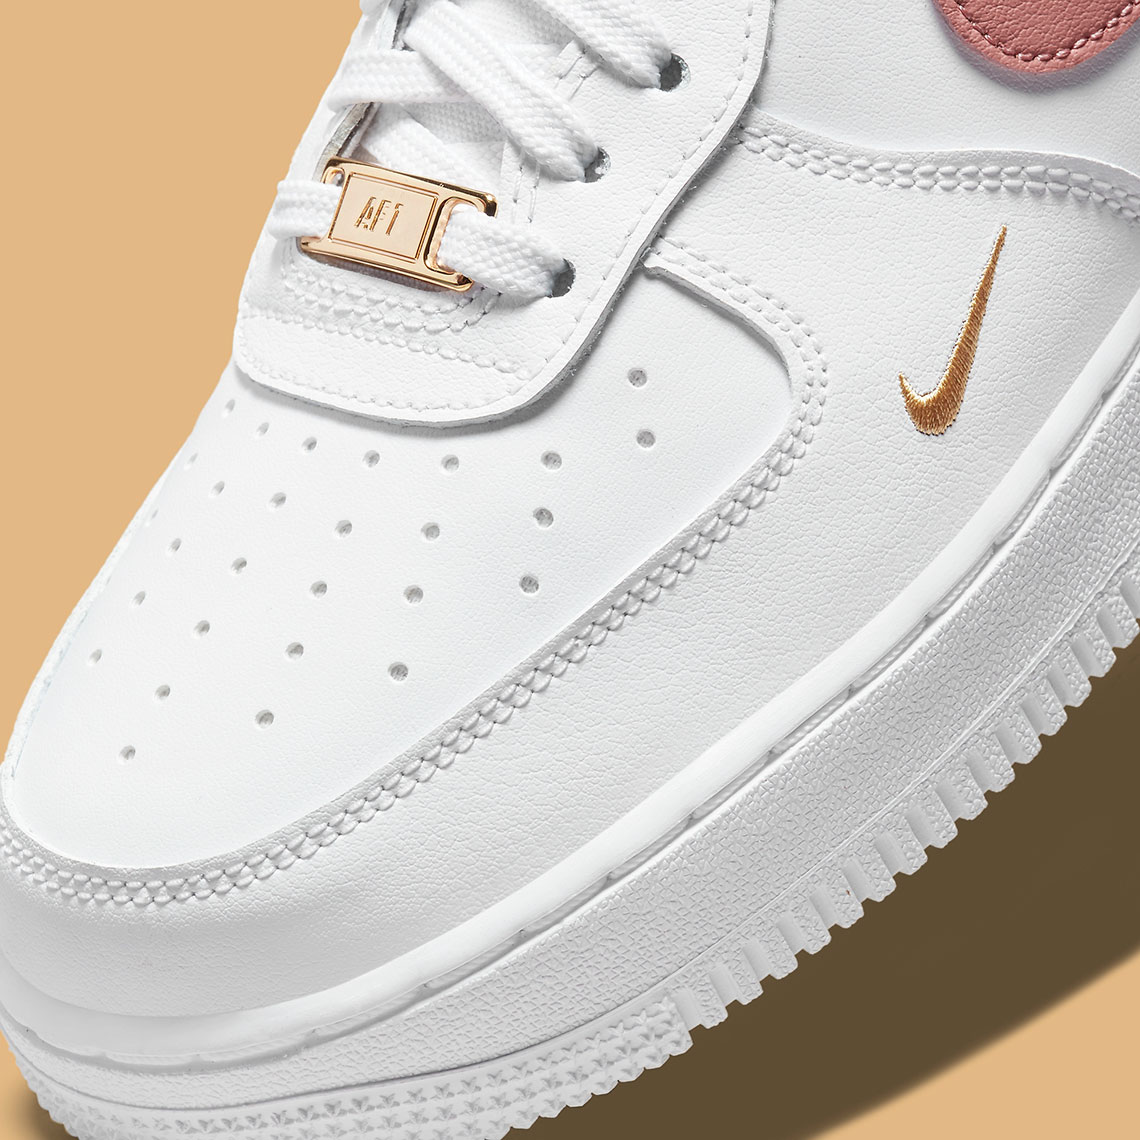 Rose Gold Swooshes On The Nike Air Force 1 High •